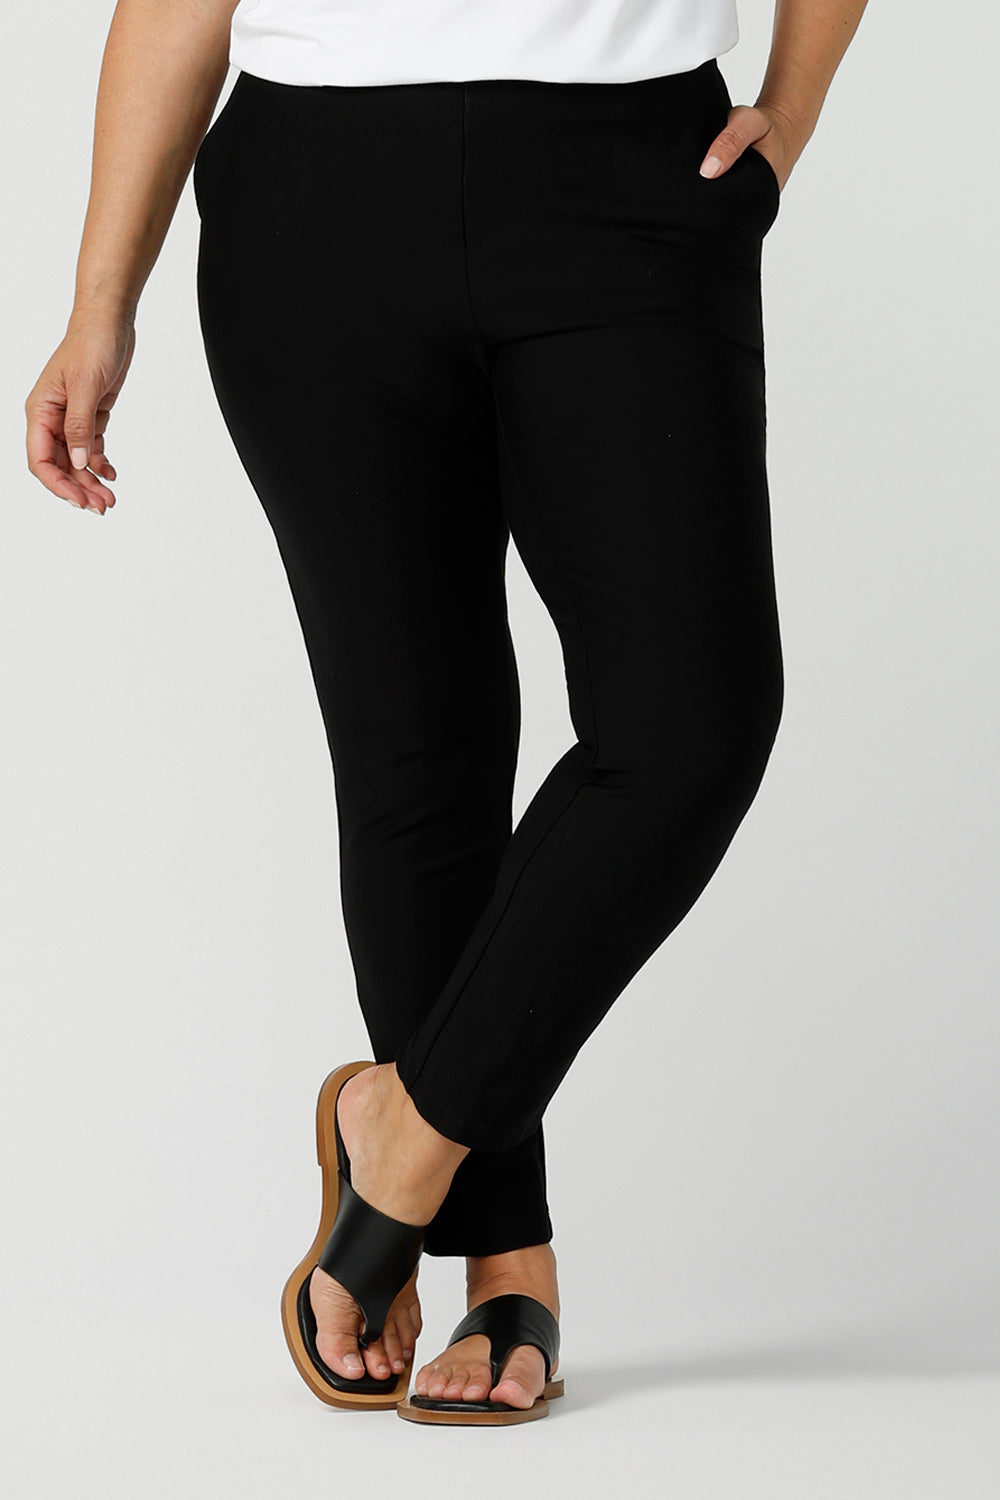 Athleta Brooklyn Pants, Review and Photo - Cruise Fashions & Beauty -  Cruise Critic Community